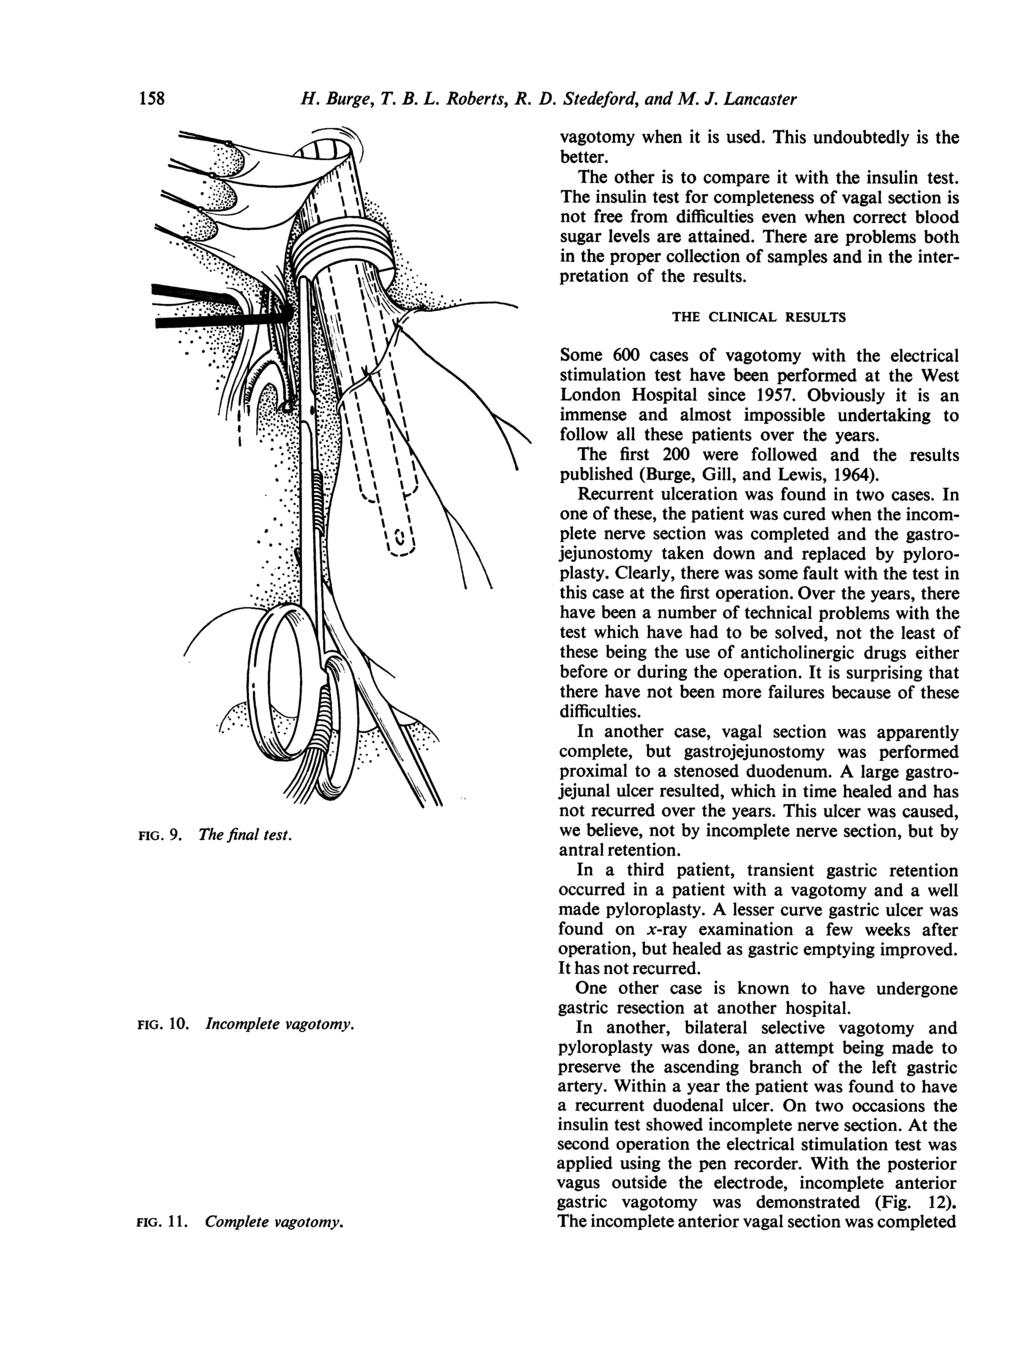 158 FIG. 9. FIG. 10. The final test. Incomplete vagotomy. FIG. 11. Complete vagotomy. H. Burge, T. B. L. Roberts, R. D. Stedeford, and M. J. Lancaster vagotomy when it is used.